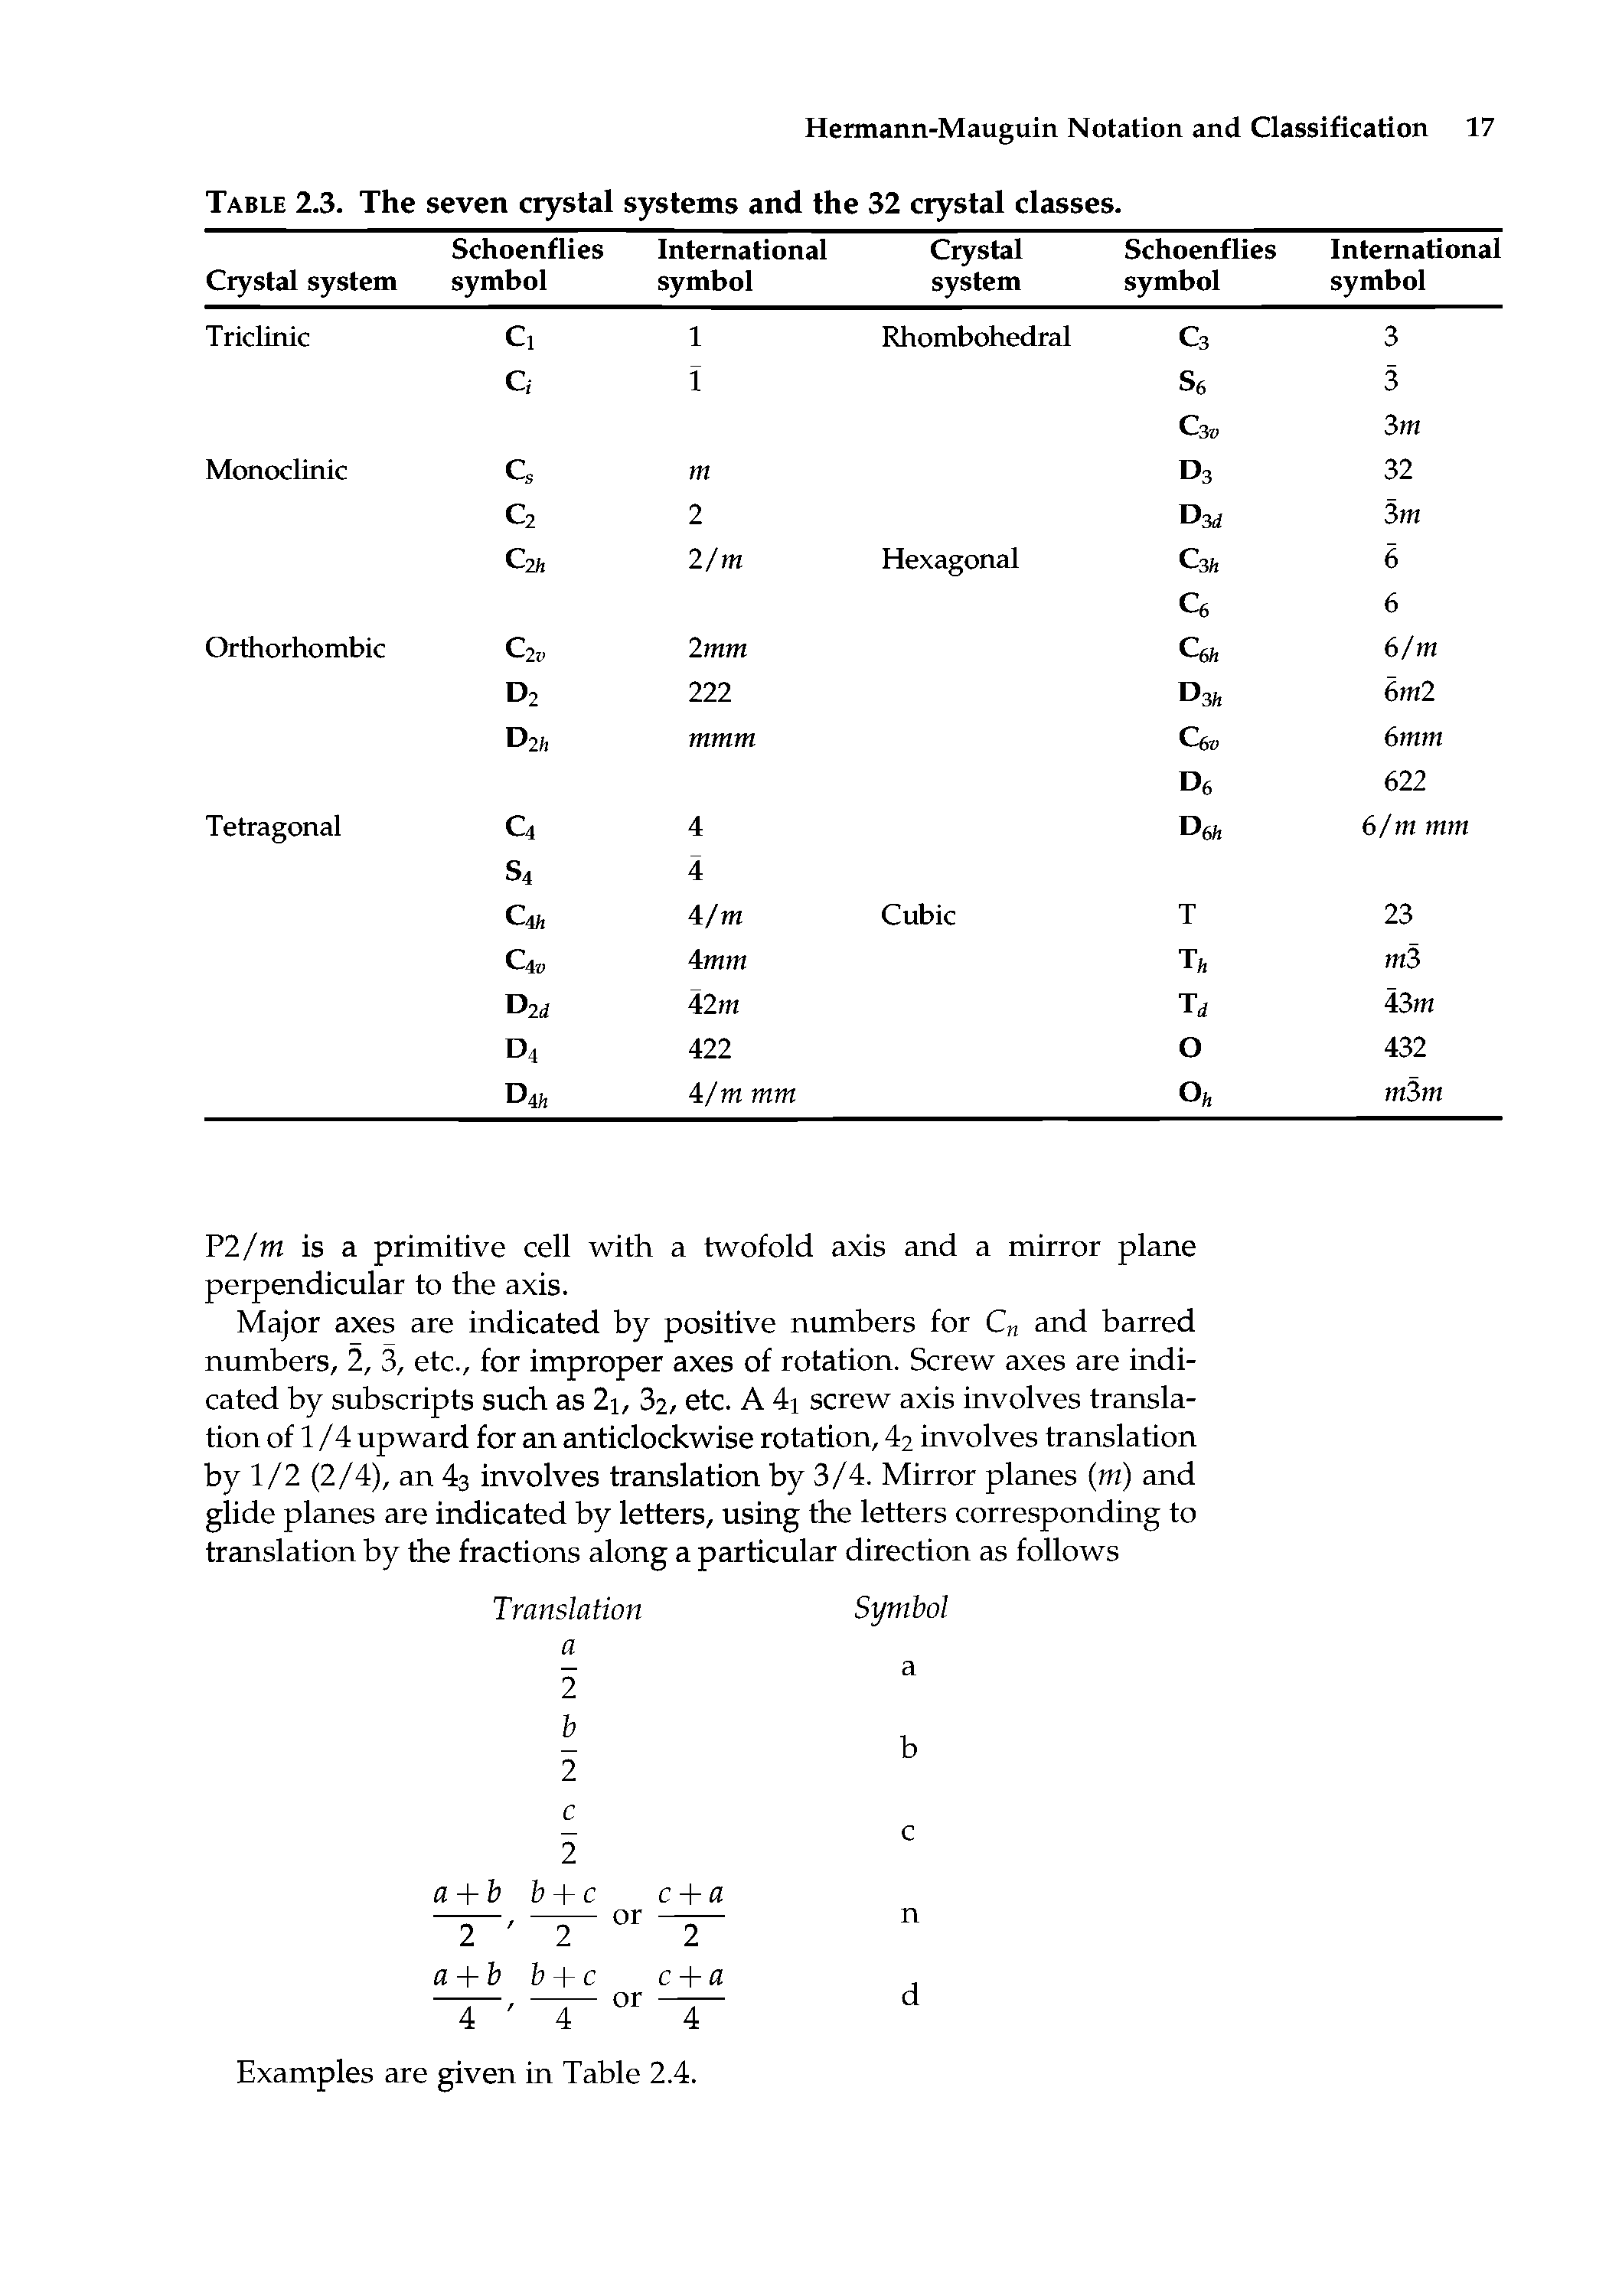 Table 2.3. The seven crystal systems and the 32 crystal classes.